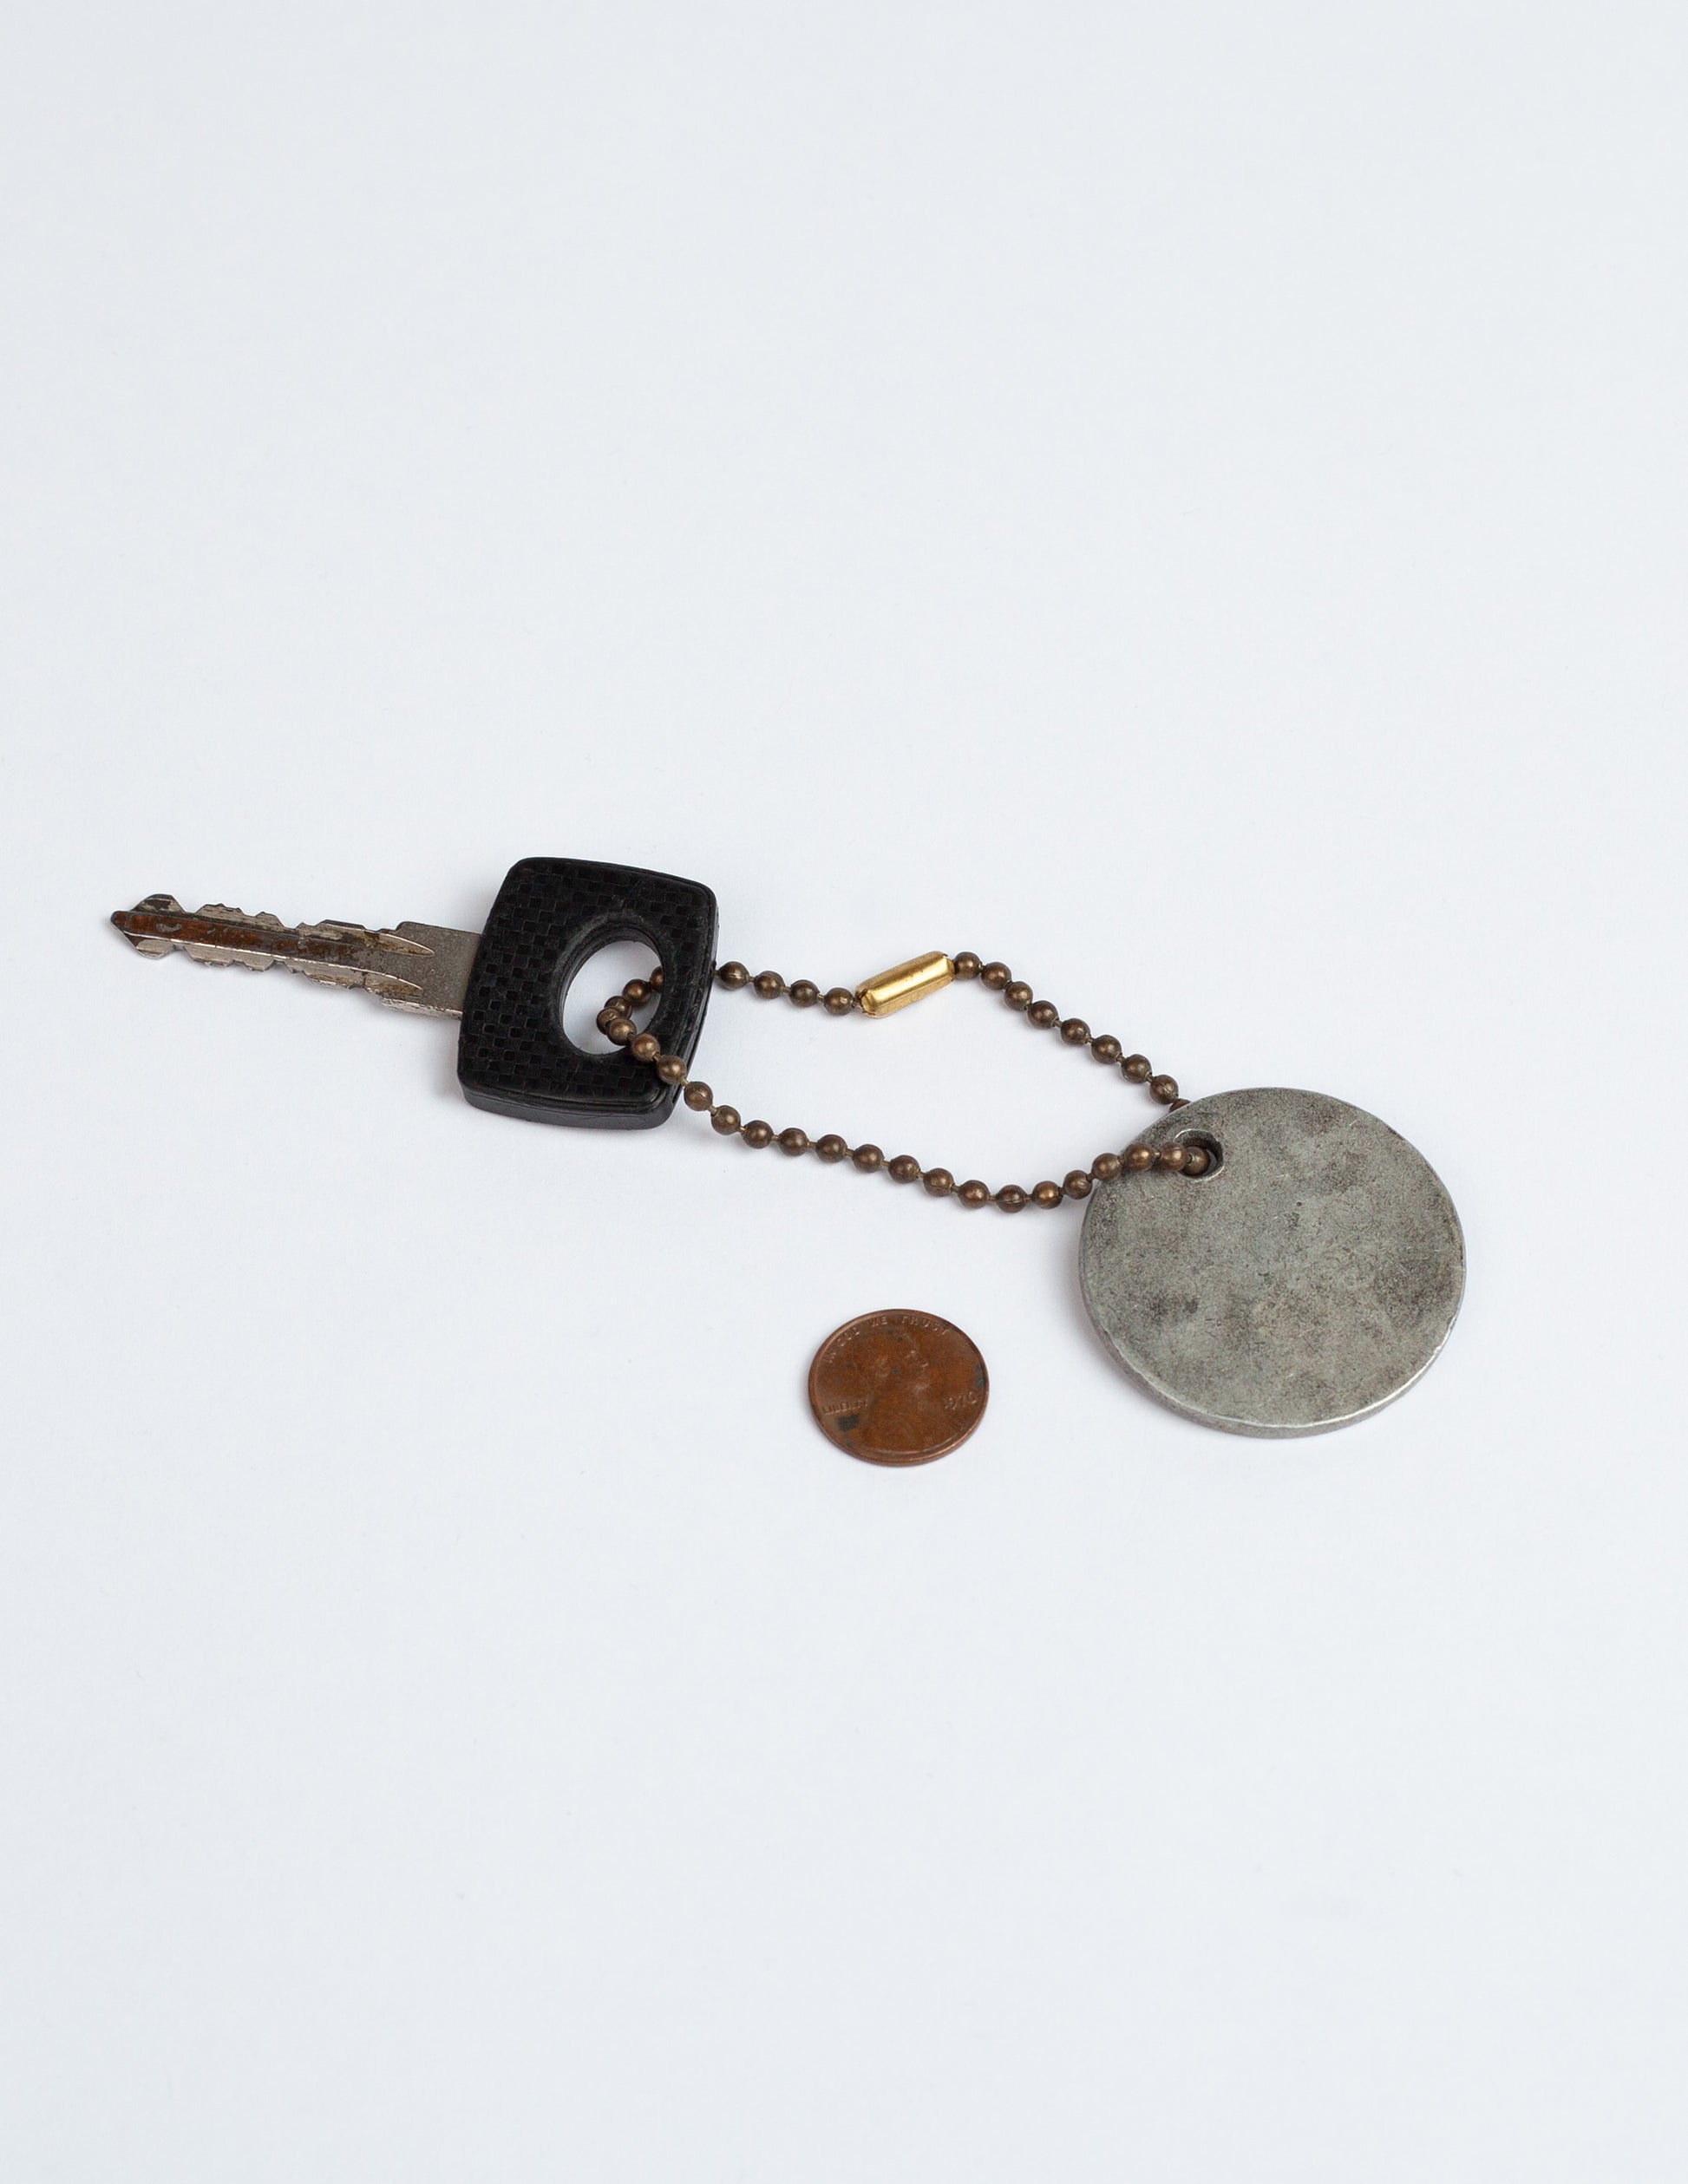 Vintage French Tool Coin Keychain